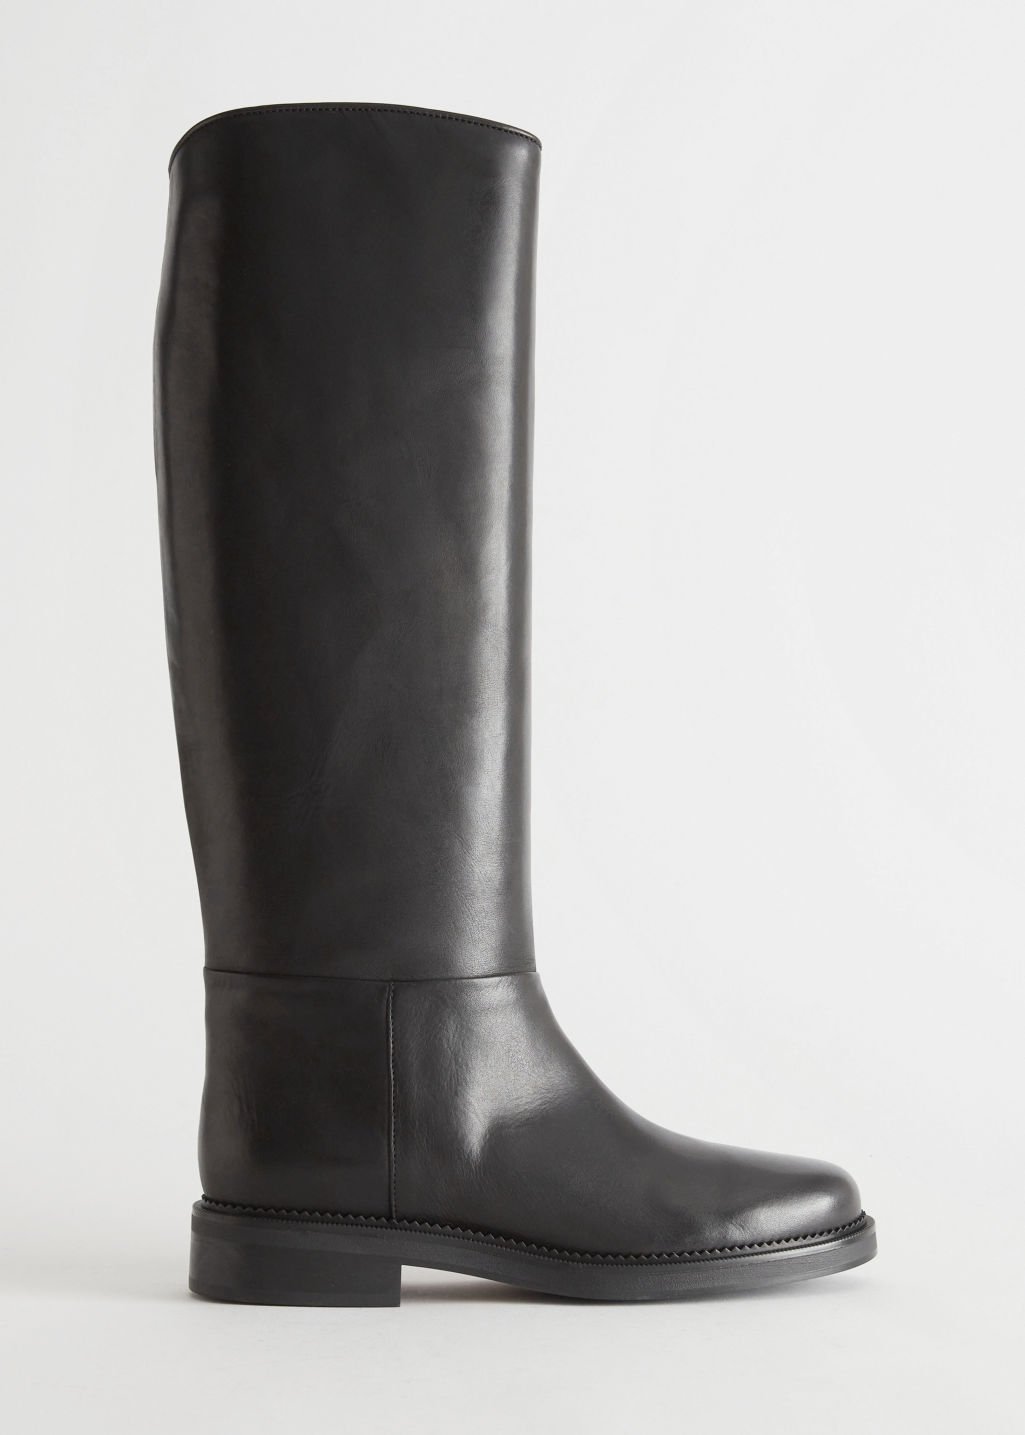 & OTHER STORIES Leather Riding Boots in Black | Endource